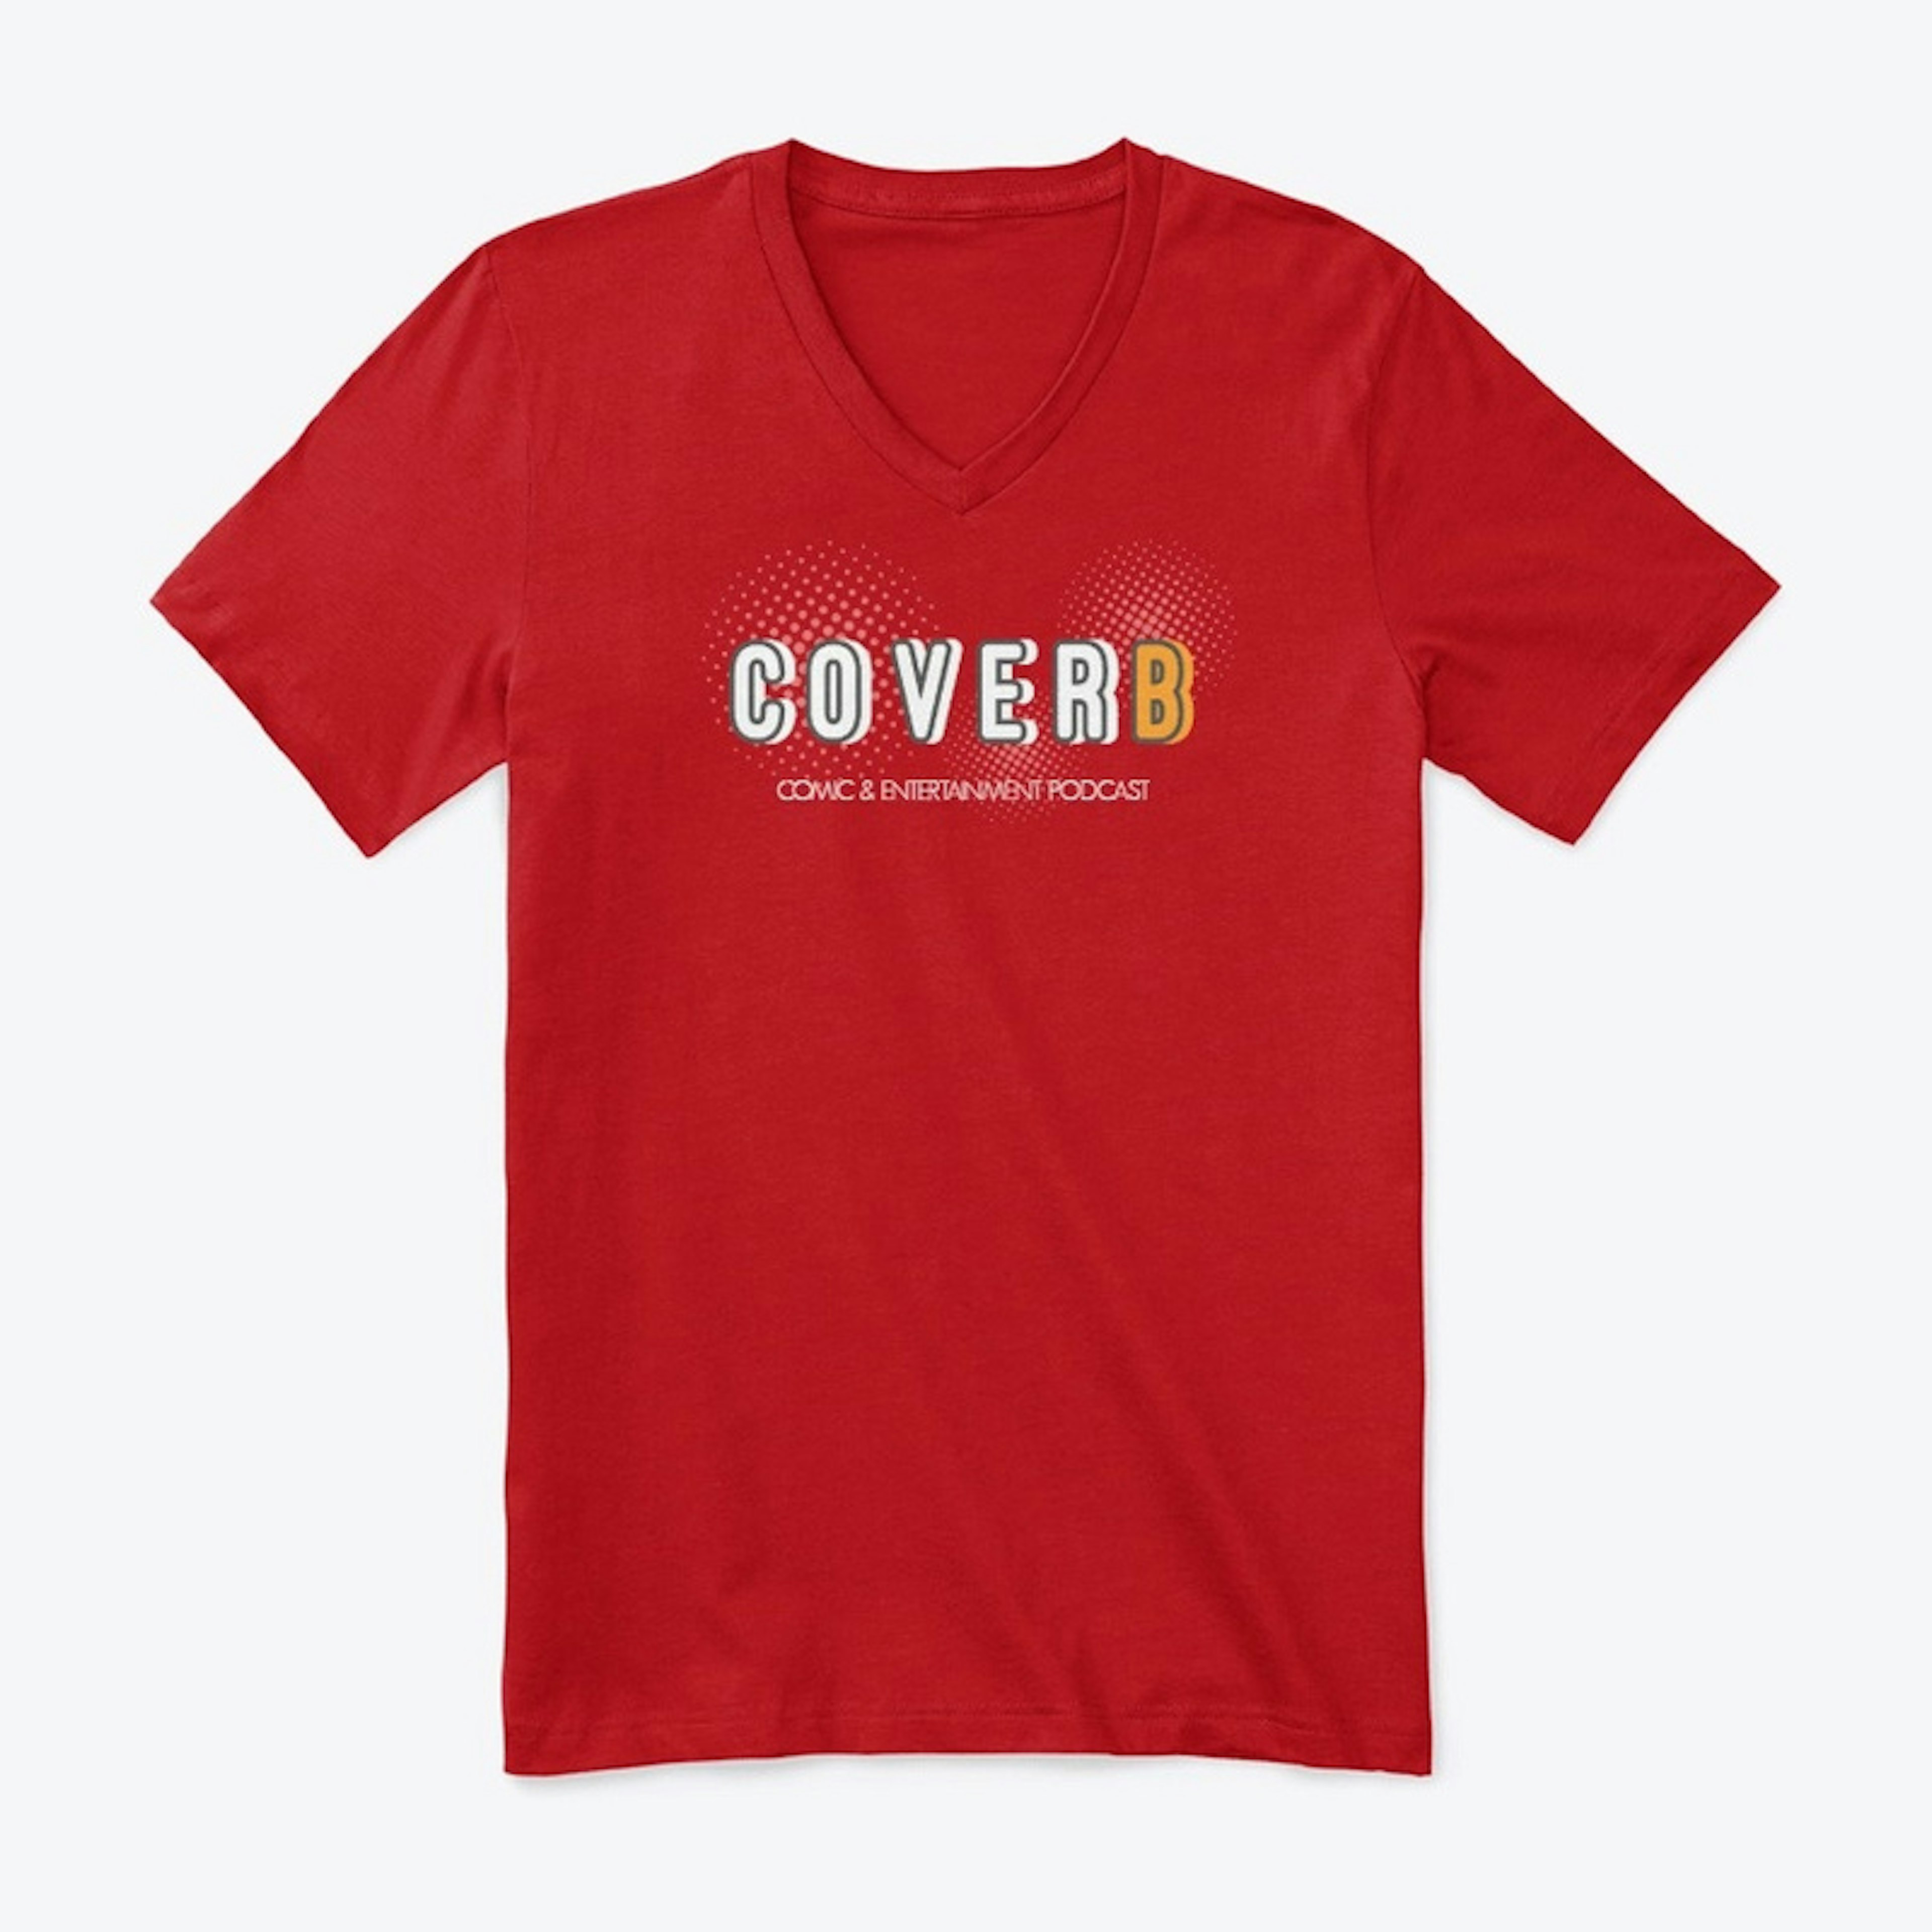 Cover B Podcast Logo T-Shirts